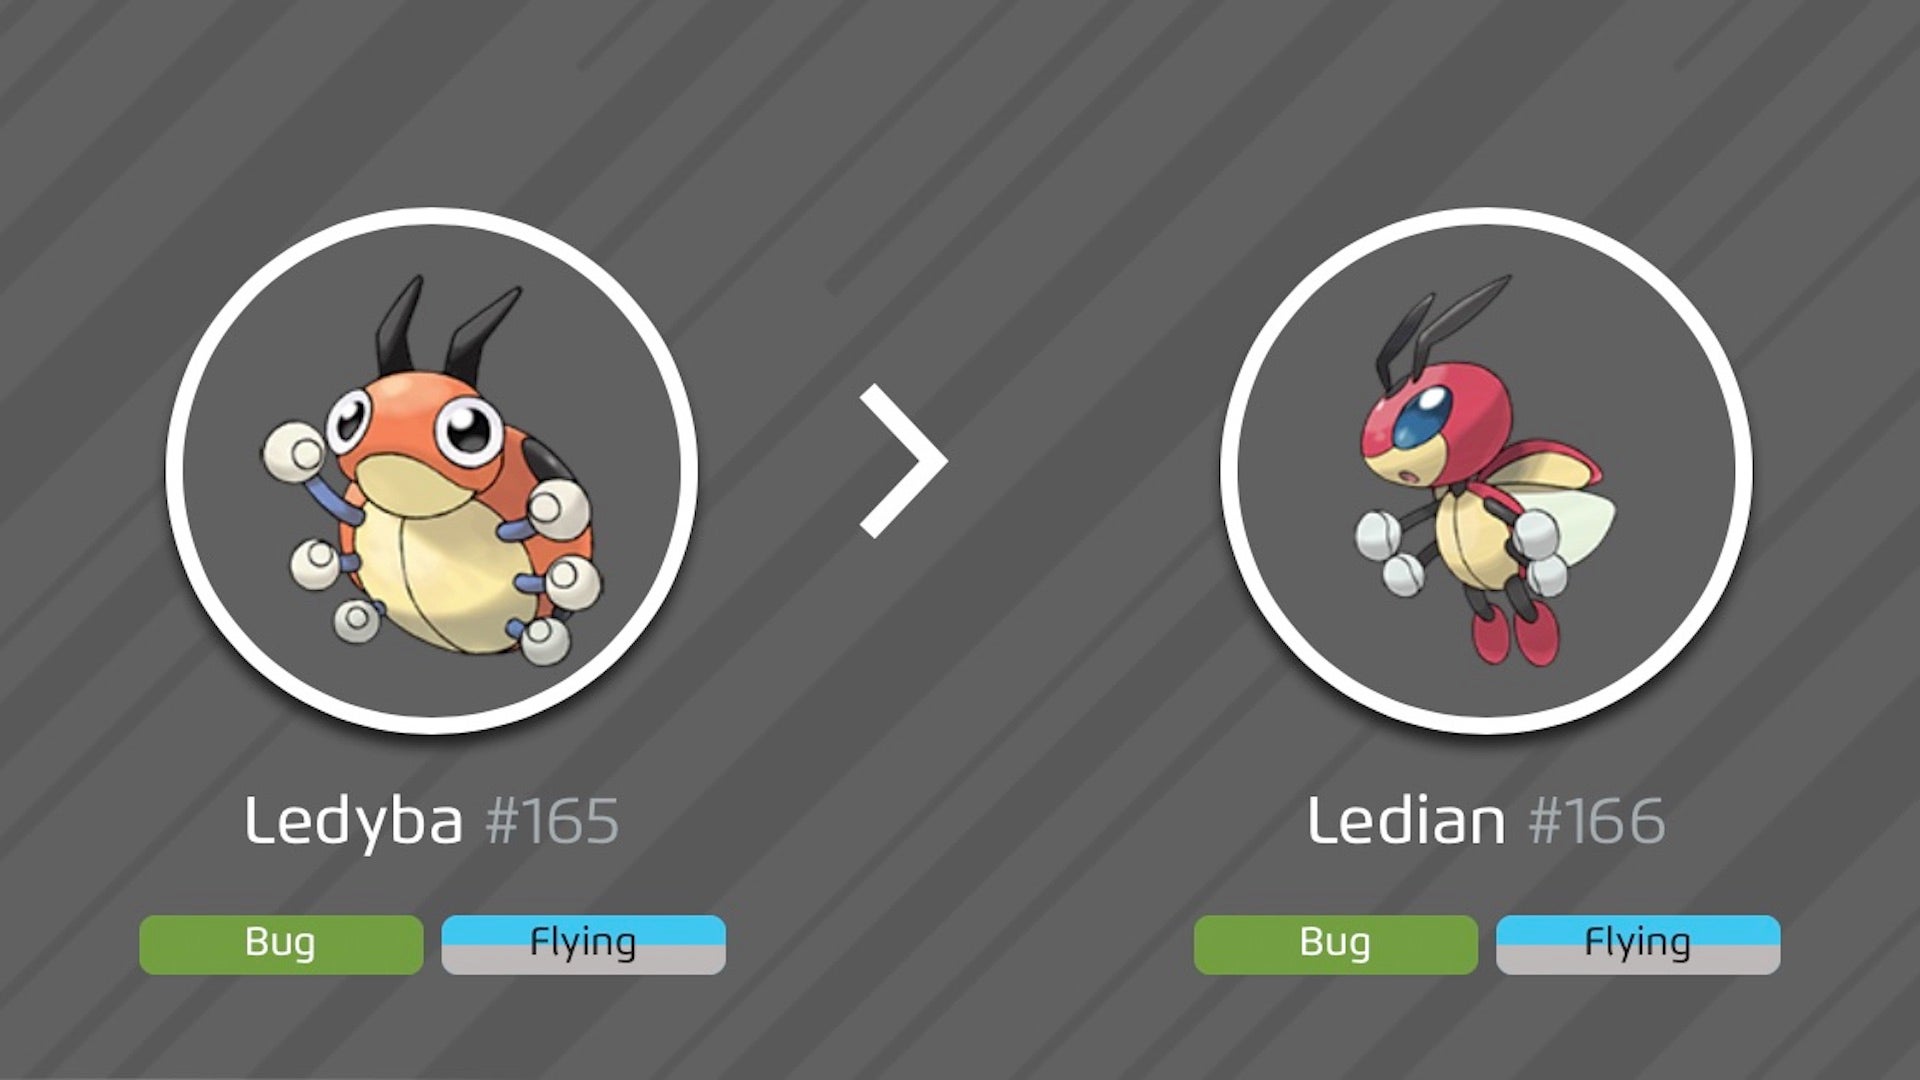 Ledyba next to its evolution Ledian. Type is lisyted under each one, reads: Bug and Flying